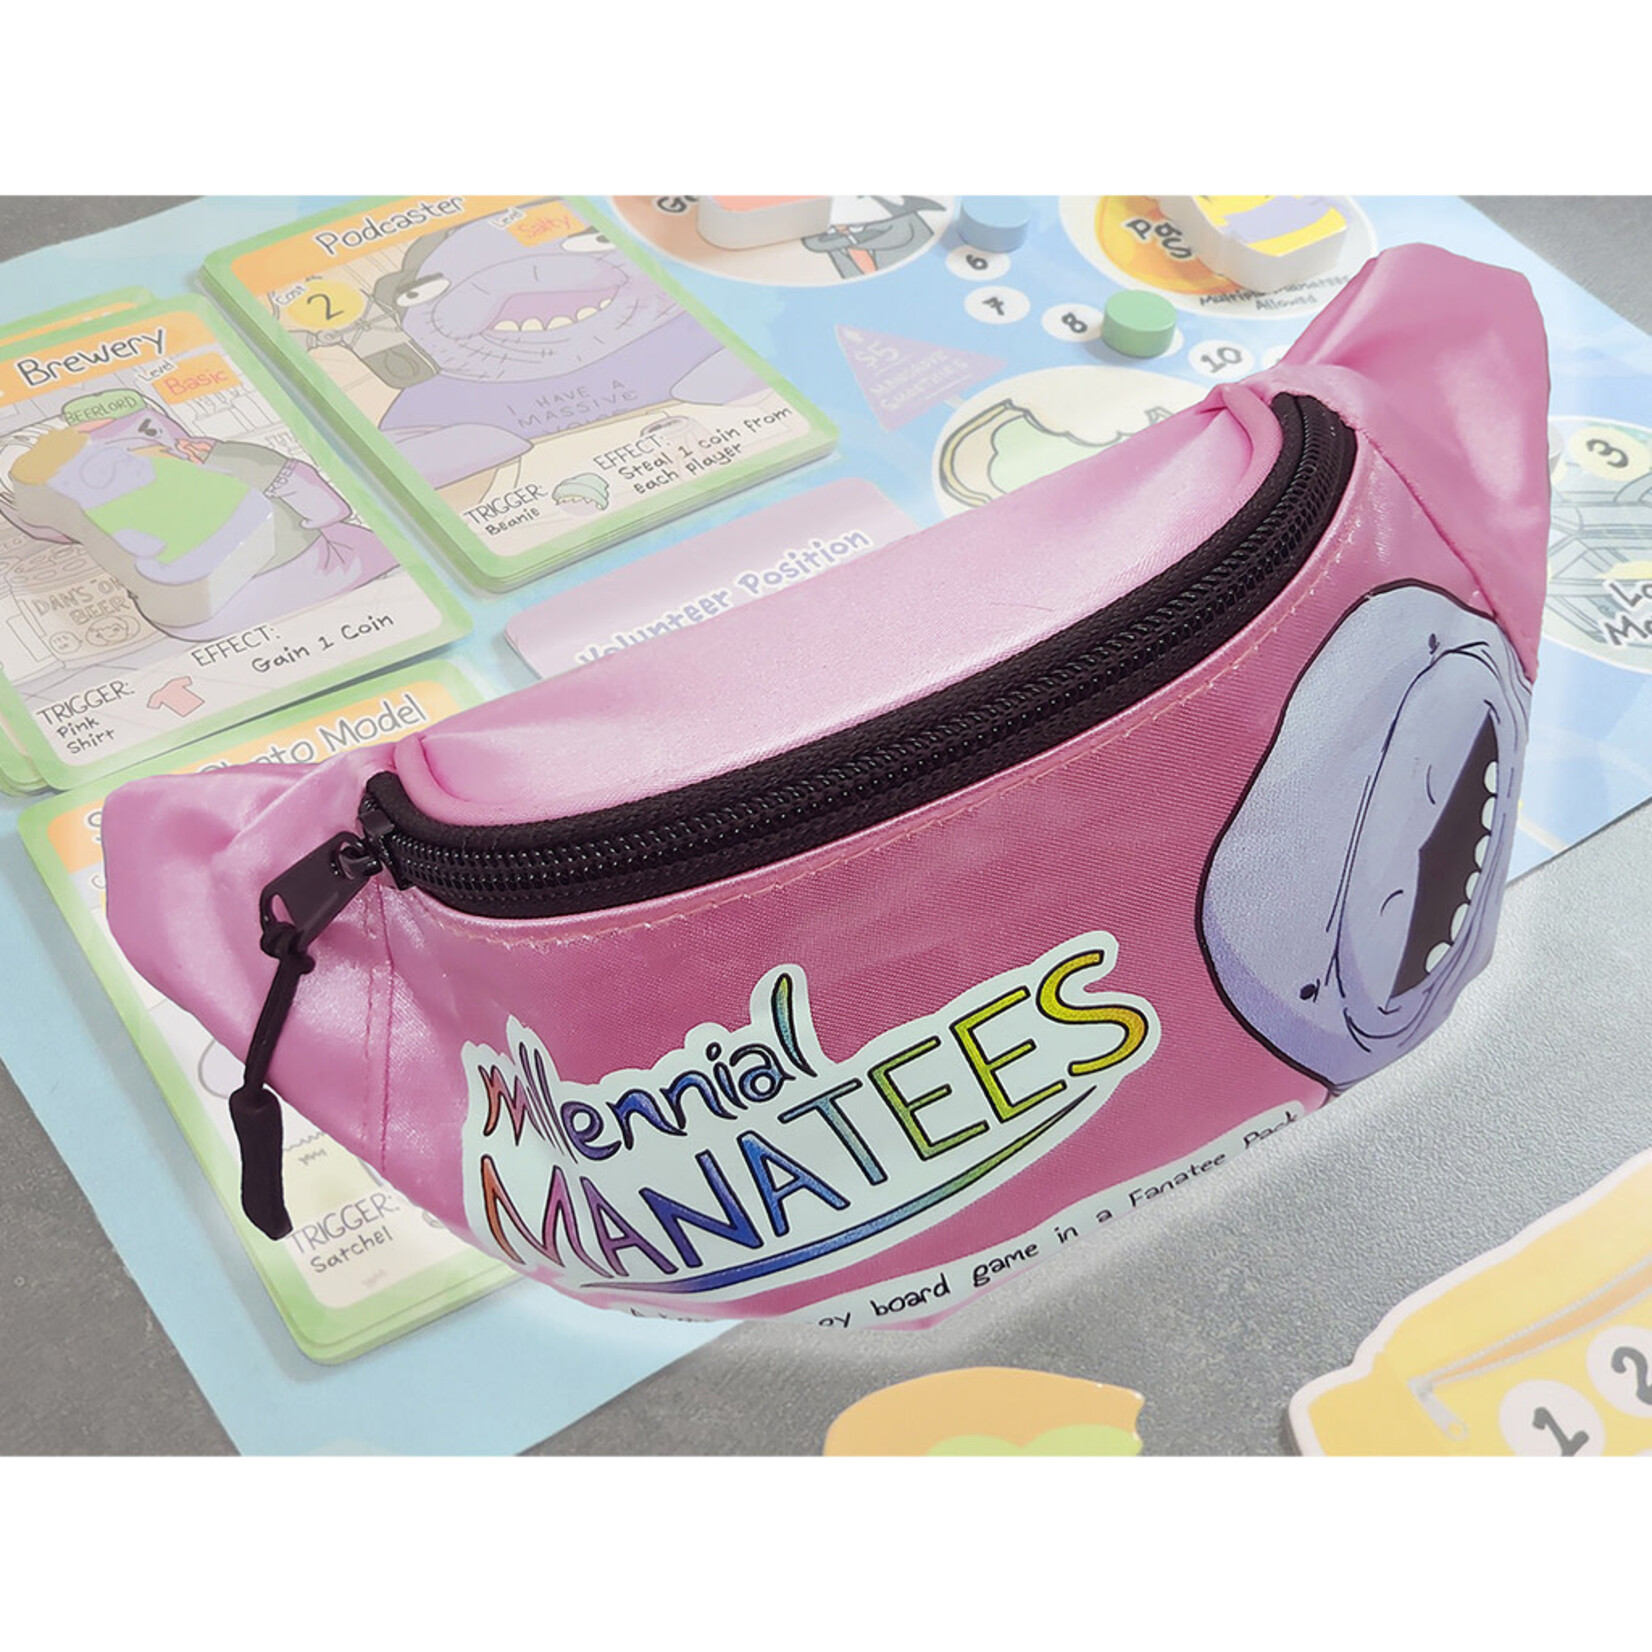 Jason Anarchy Games Millennial Manatees: Board Game in a Fanatee Pack